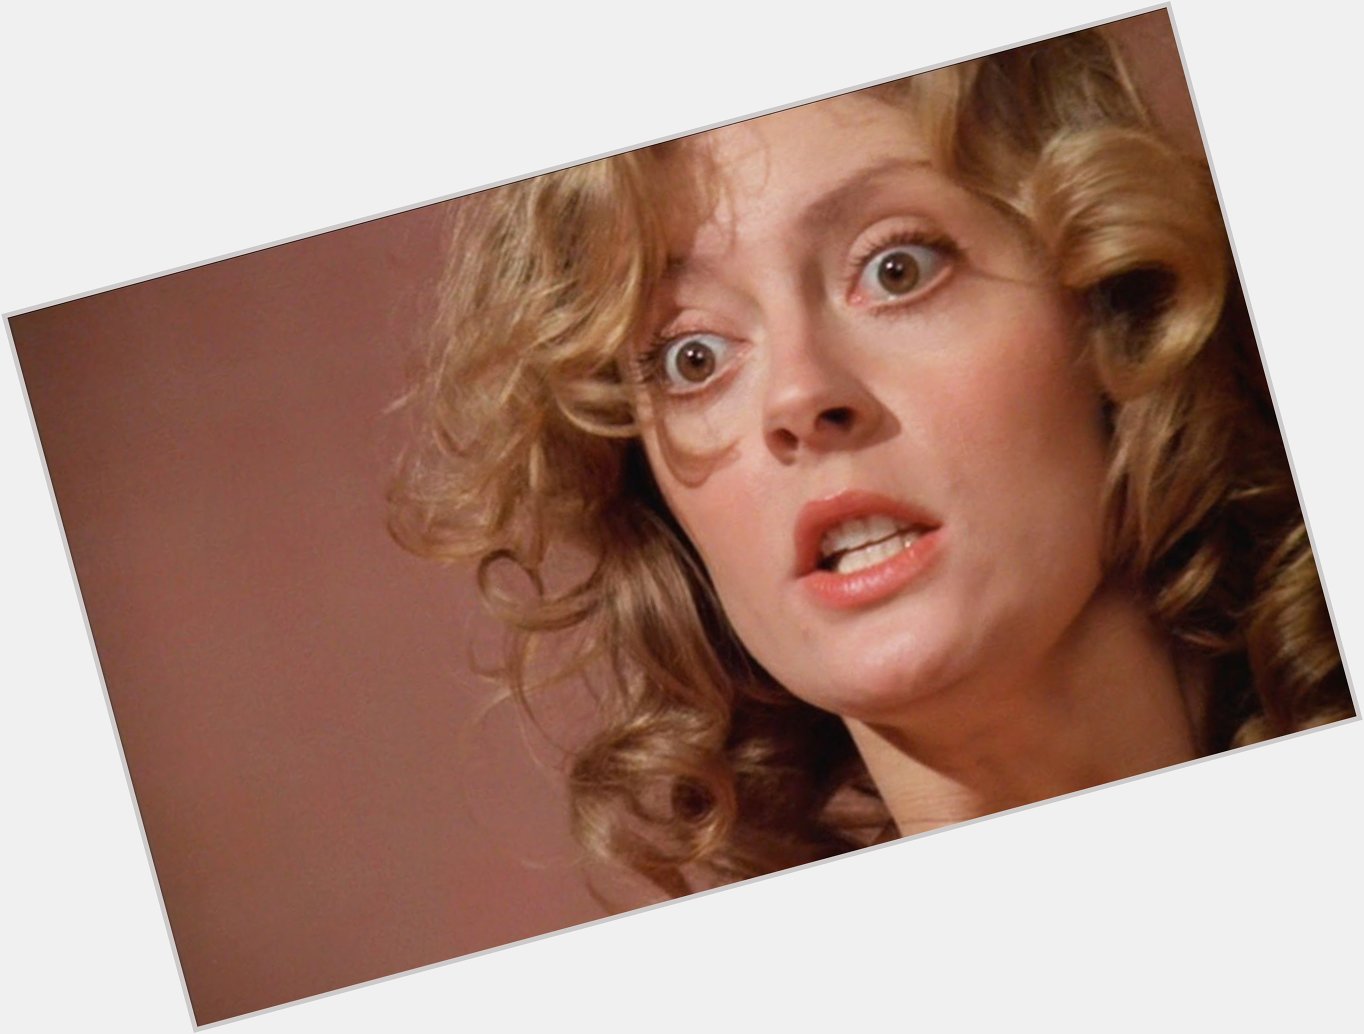 Happy Birthday Susan Sarandon!
You know all us Rocky Horror lovers are celebrating you even more this month  